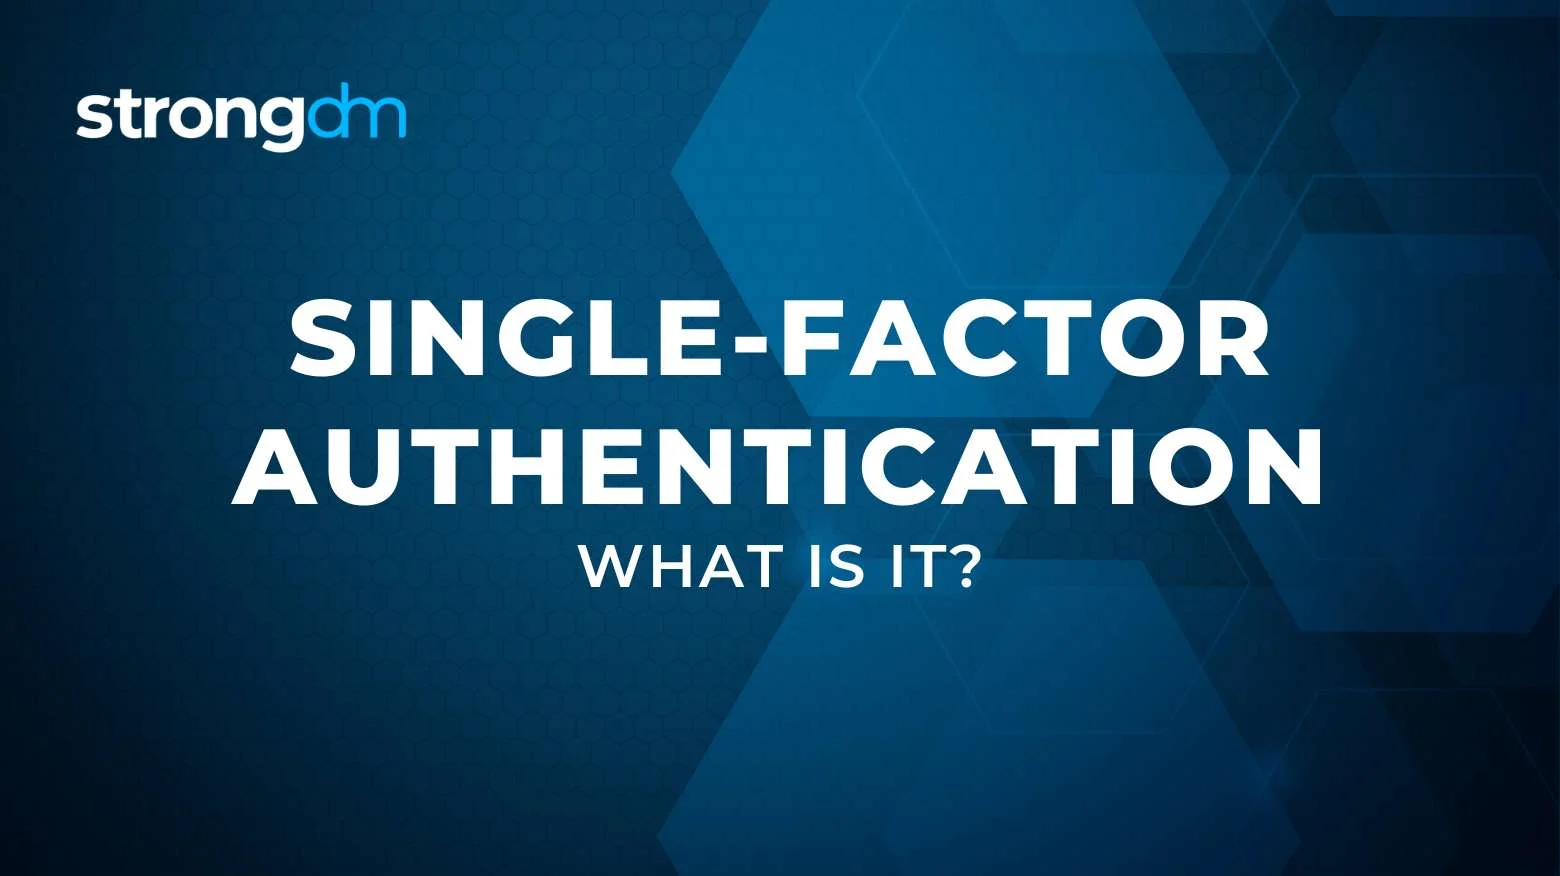 What is Single-Factor Authentication? Definition